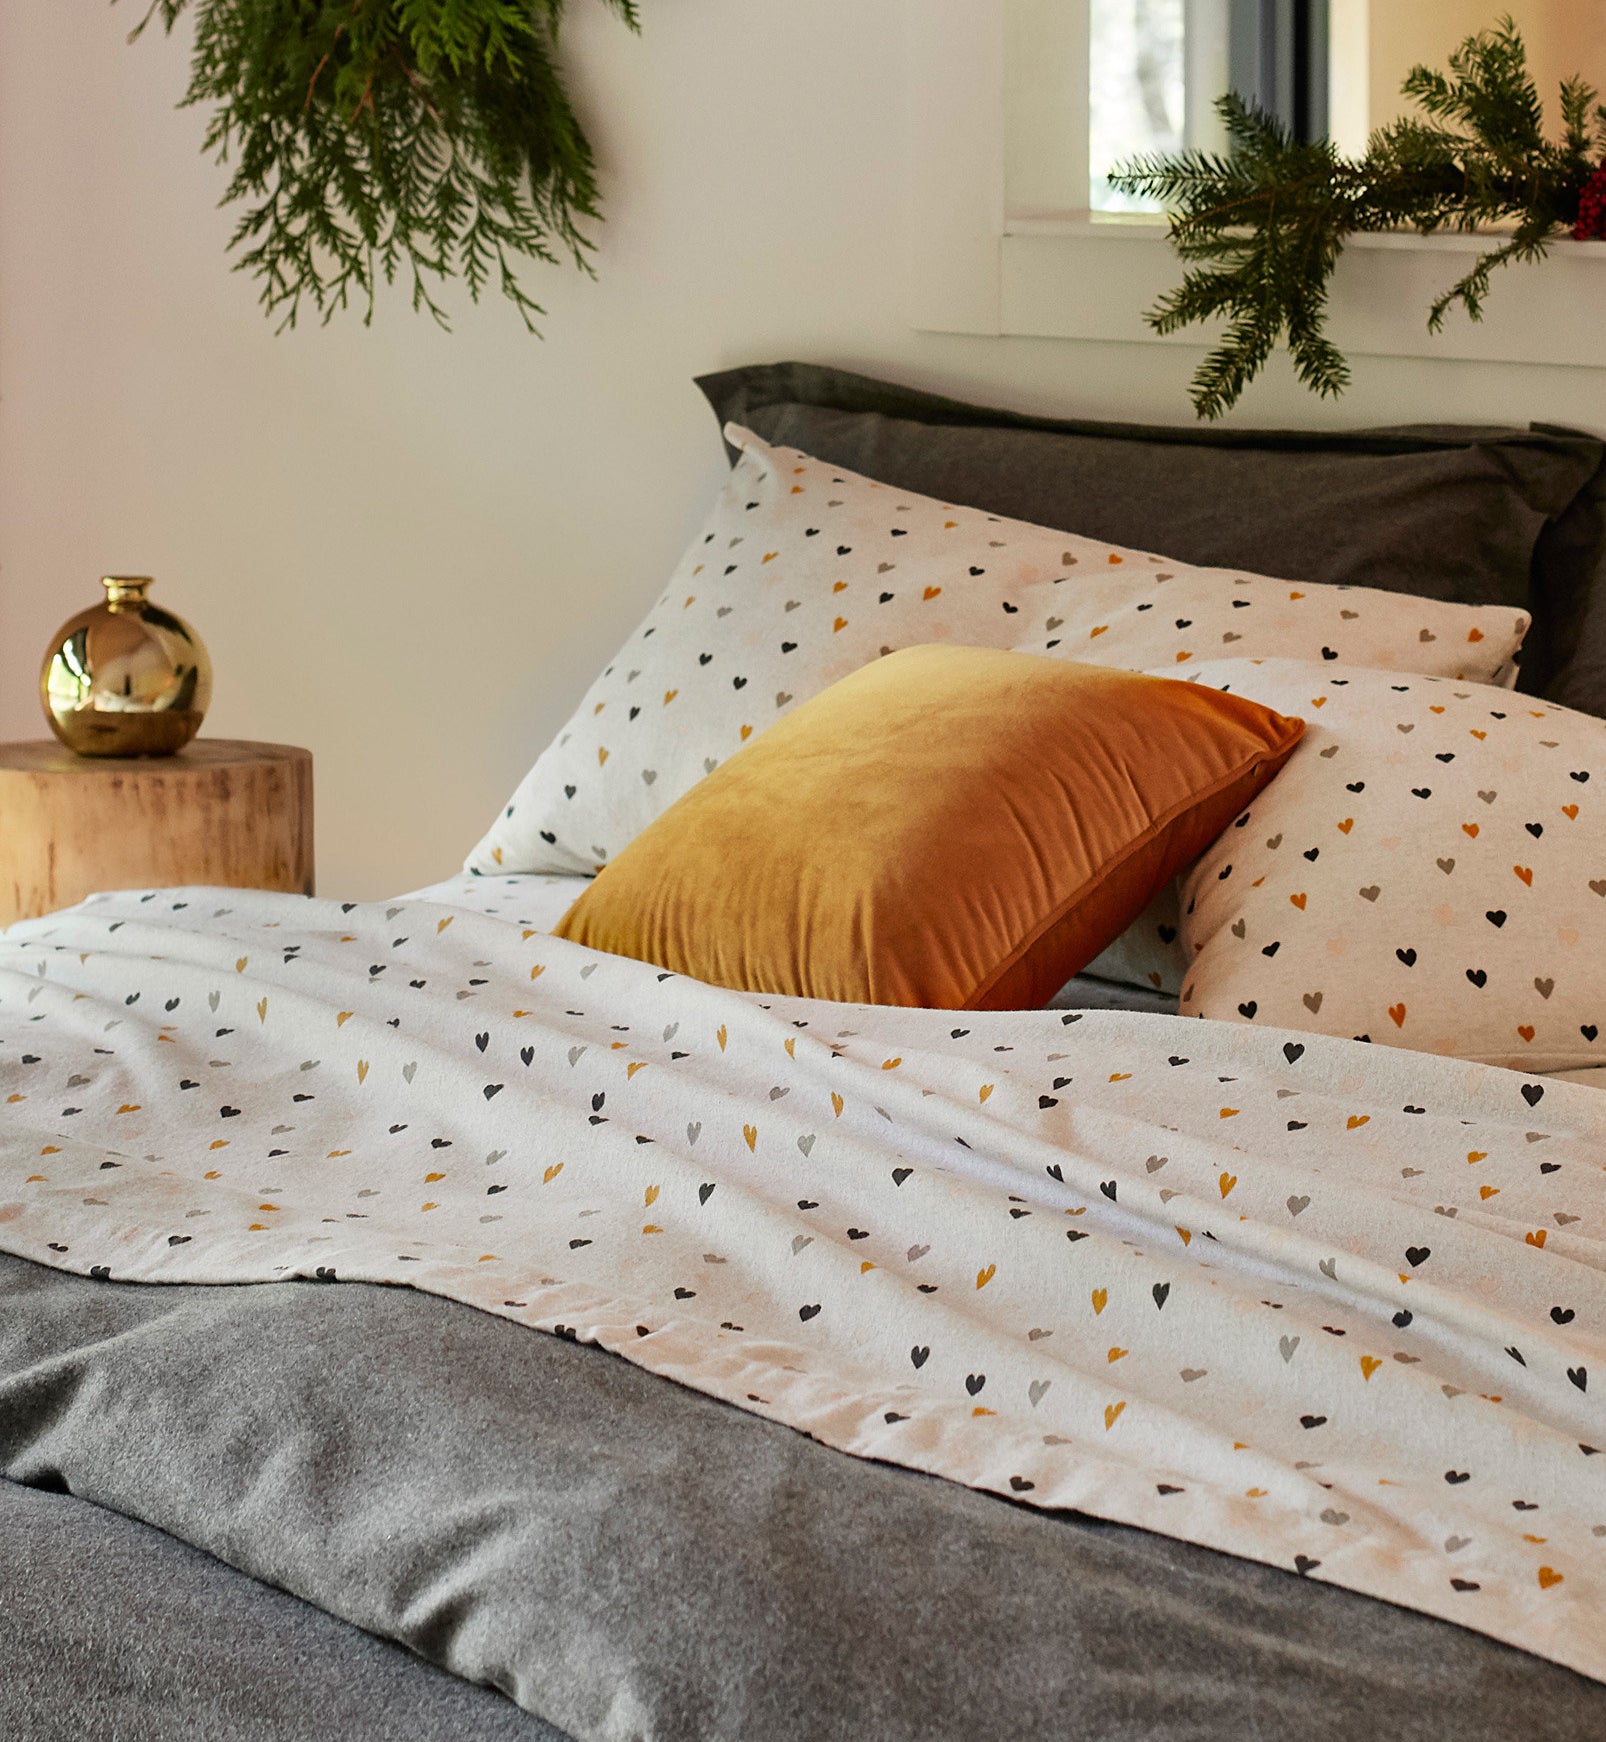 a set of soft flannel sheets on a neatly made up bed